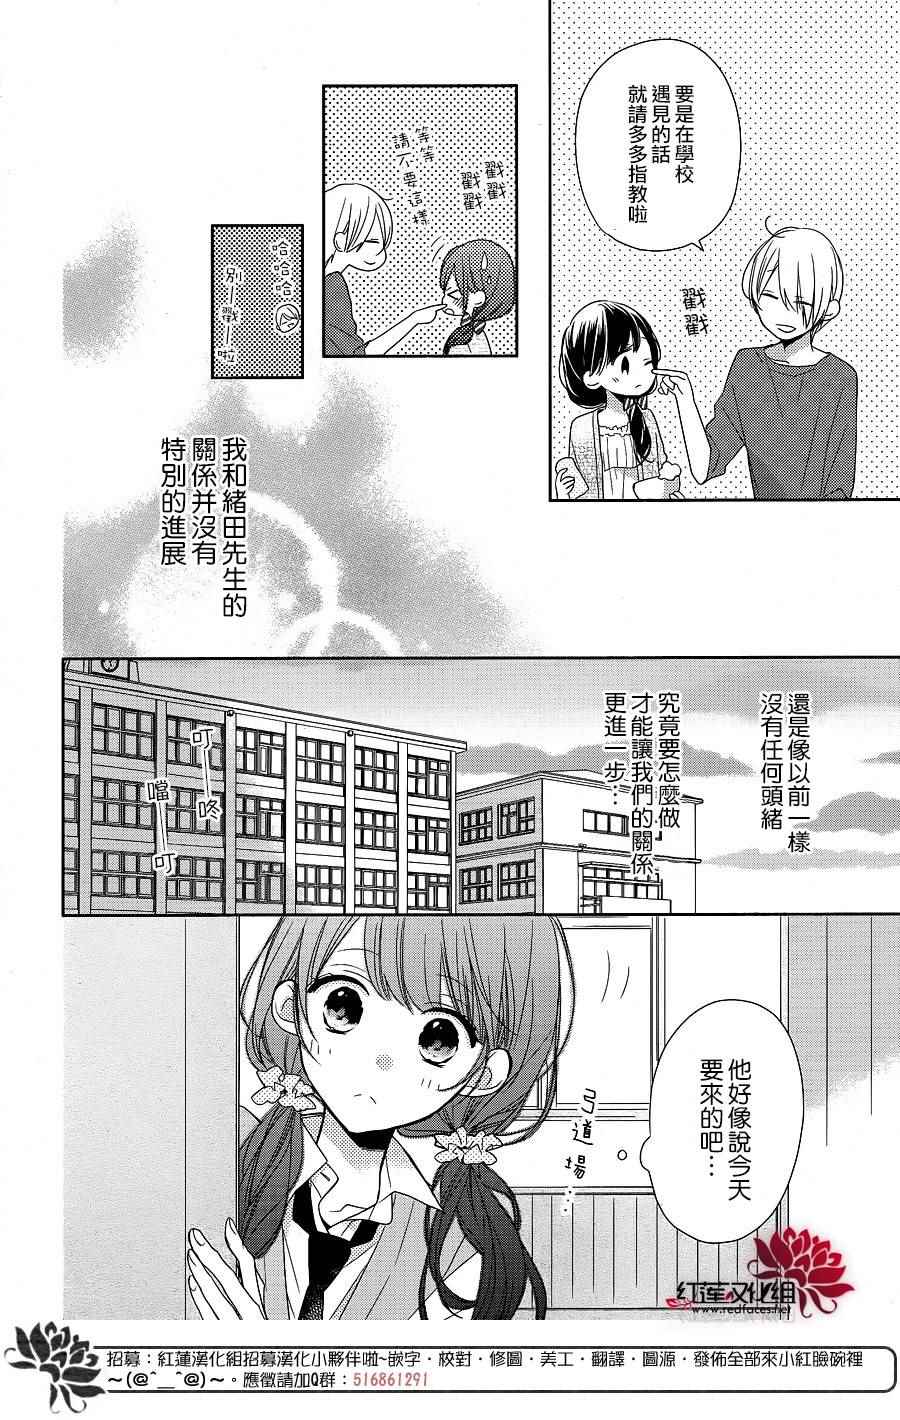 《If given a second chance》漫画 second chance 008话